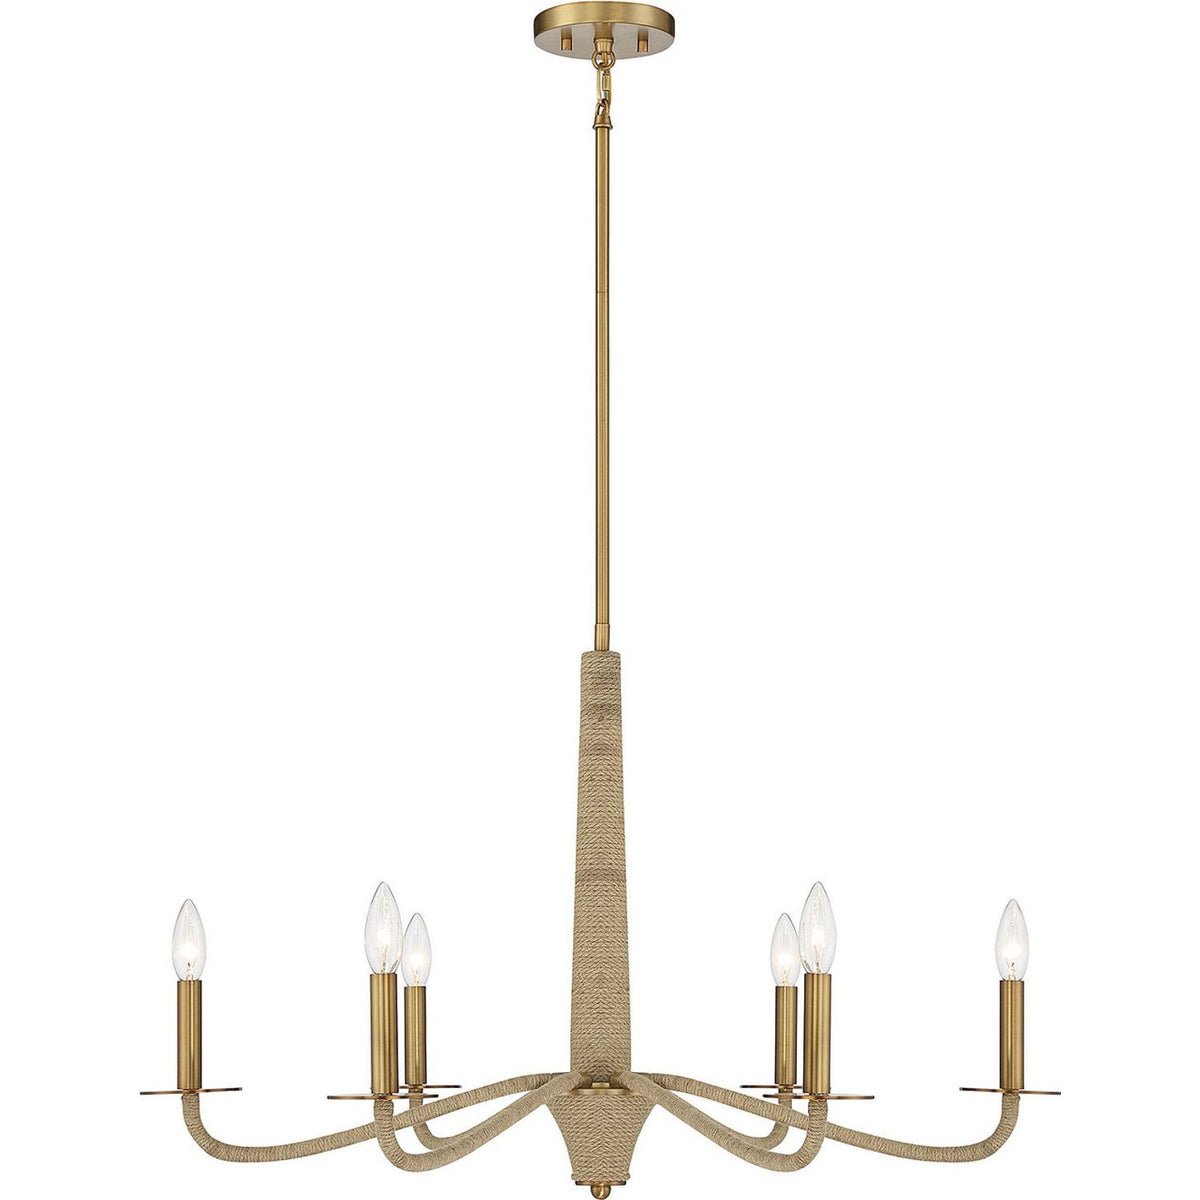 Savoy House - 1-1824-6-320 - Six Light Chandelier - Cannon - Warm Brass and Rope